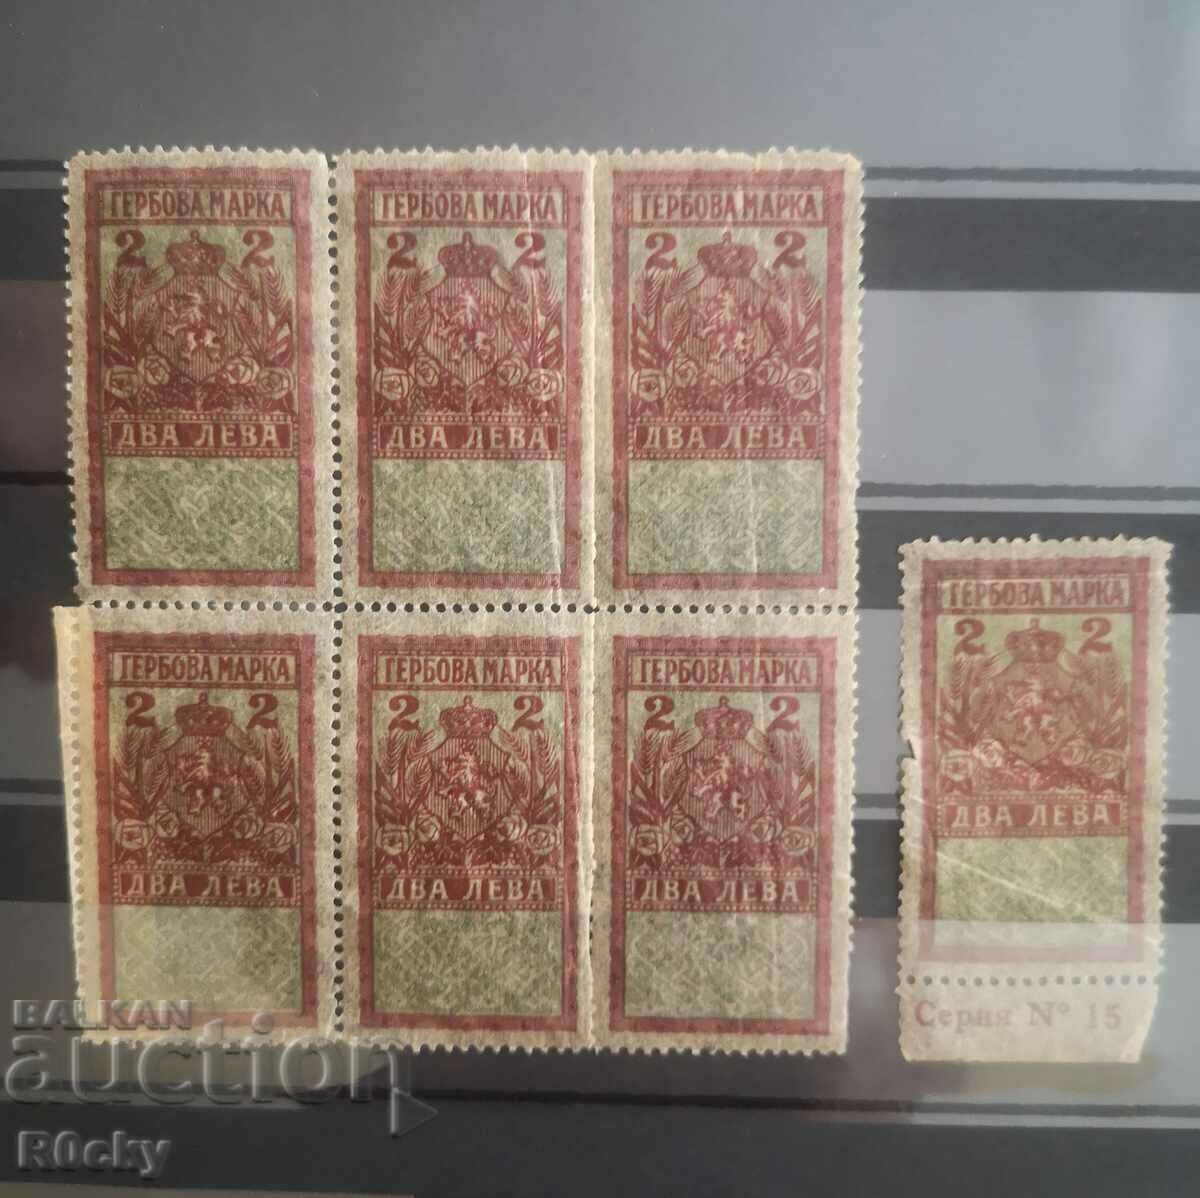 Stamps 1925 from 2 BGN